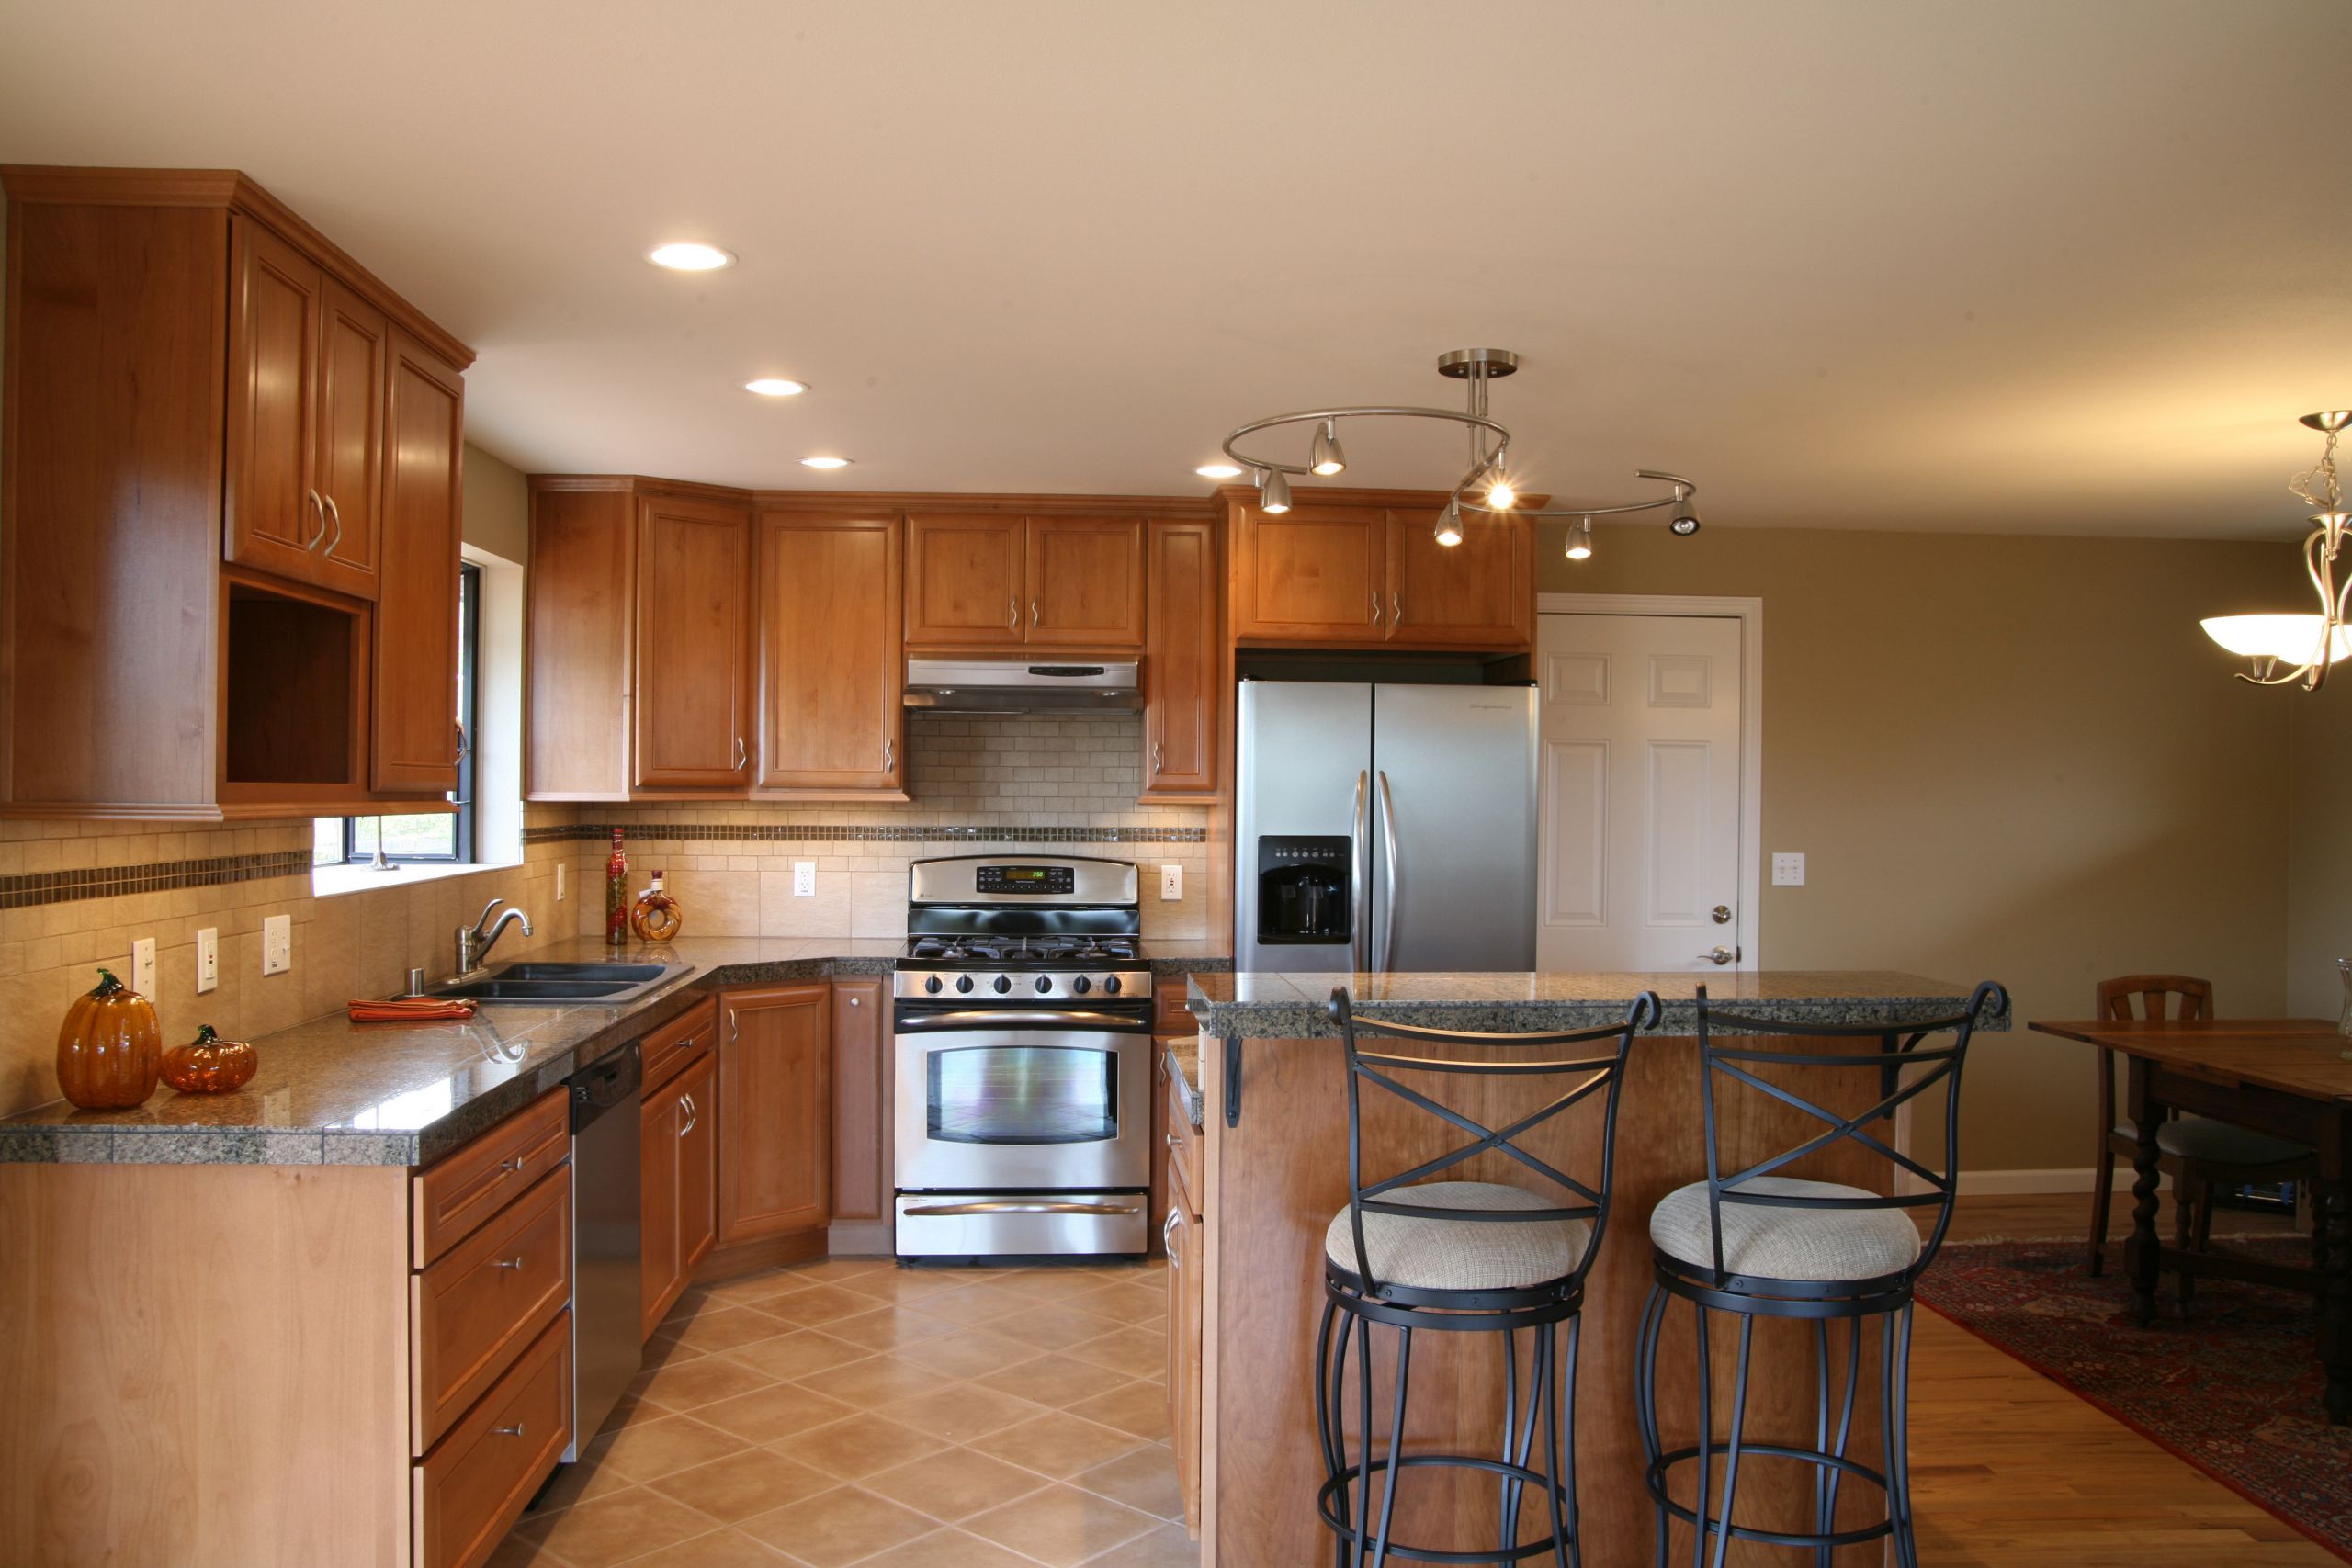 Kitchen Cabinet Remodeling
 Add value to your home with Upscale Kitchen Remodeling